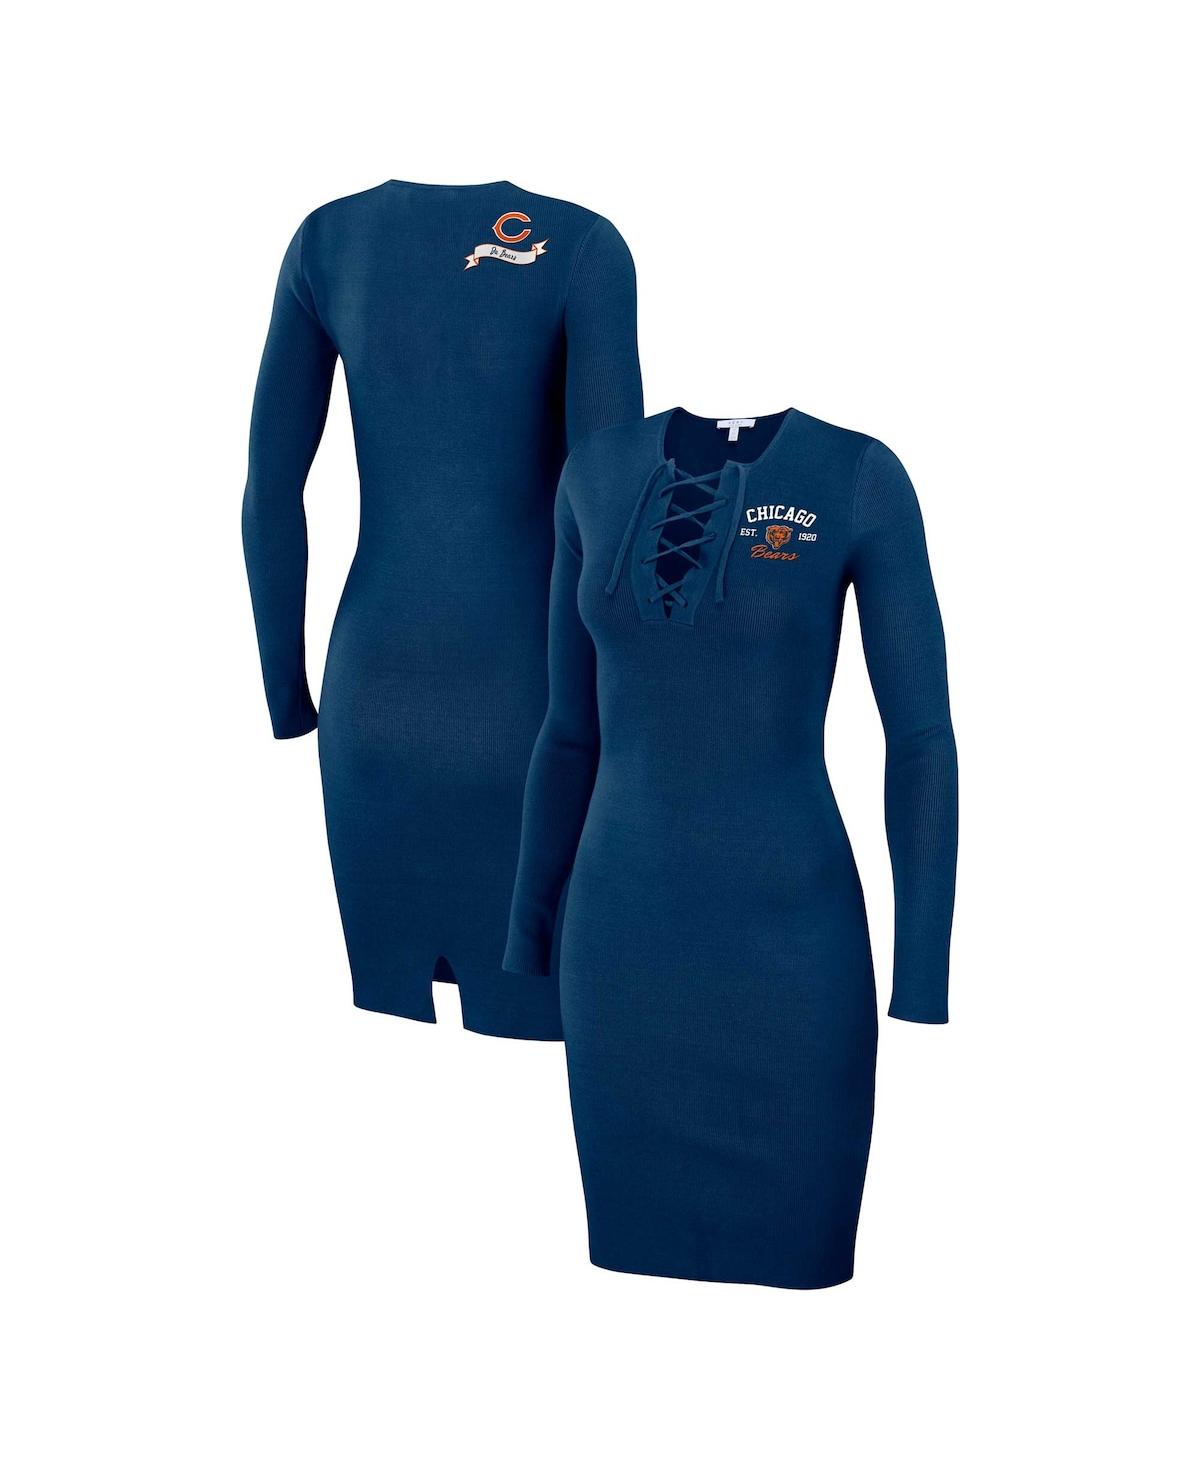 Shop Wear By Erin Andrews Women's  Navy Chicago Bears Lace Up Long Sleeve Dress